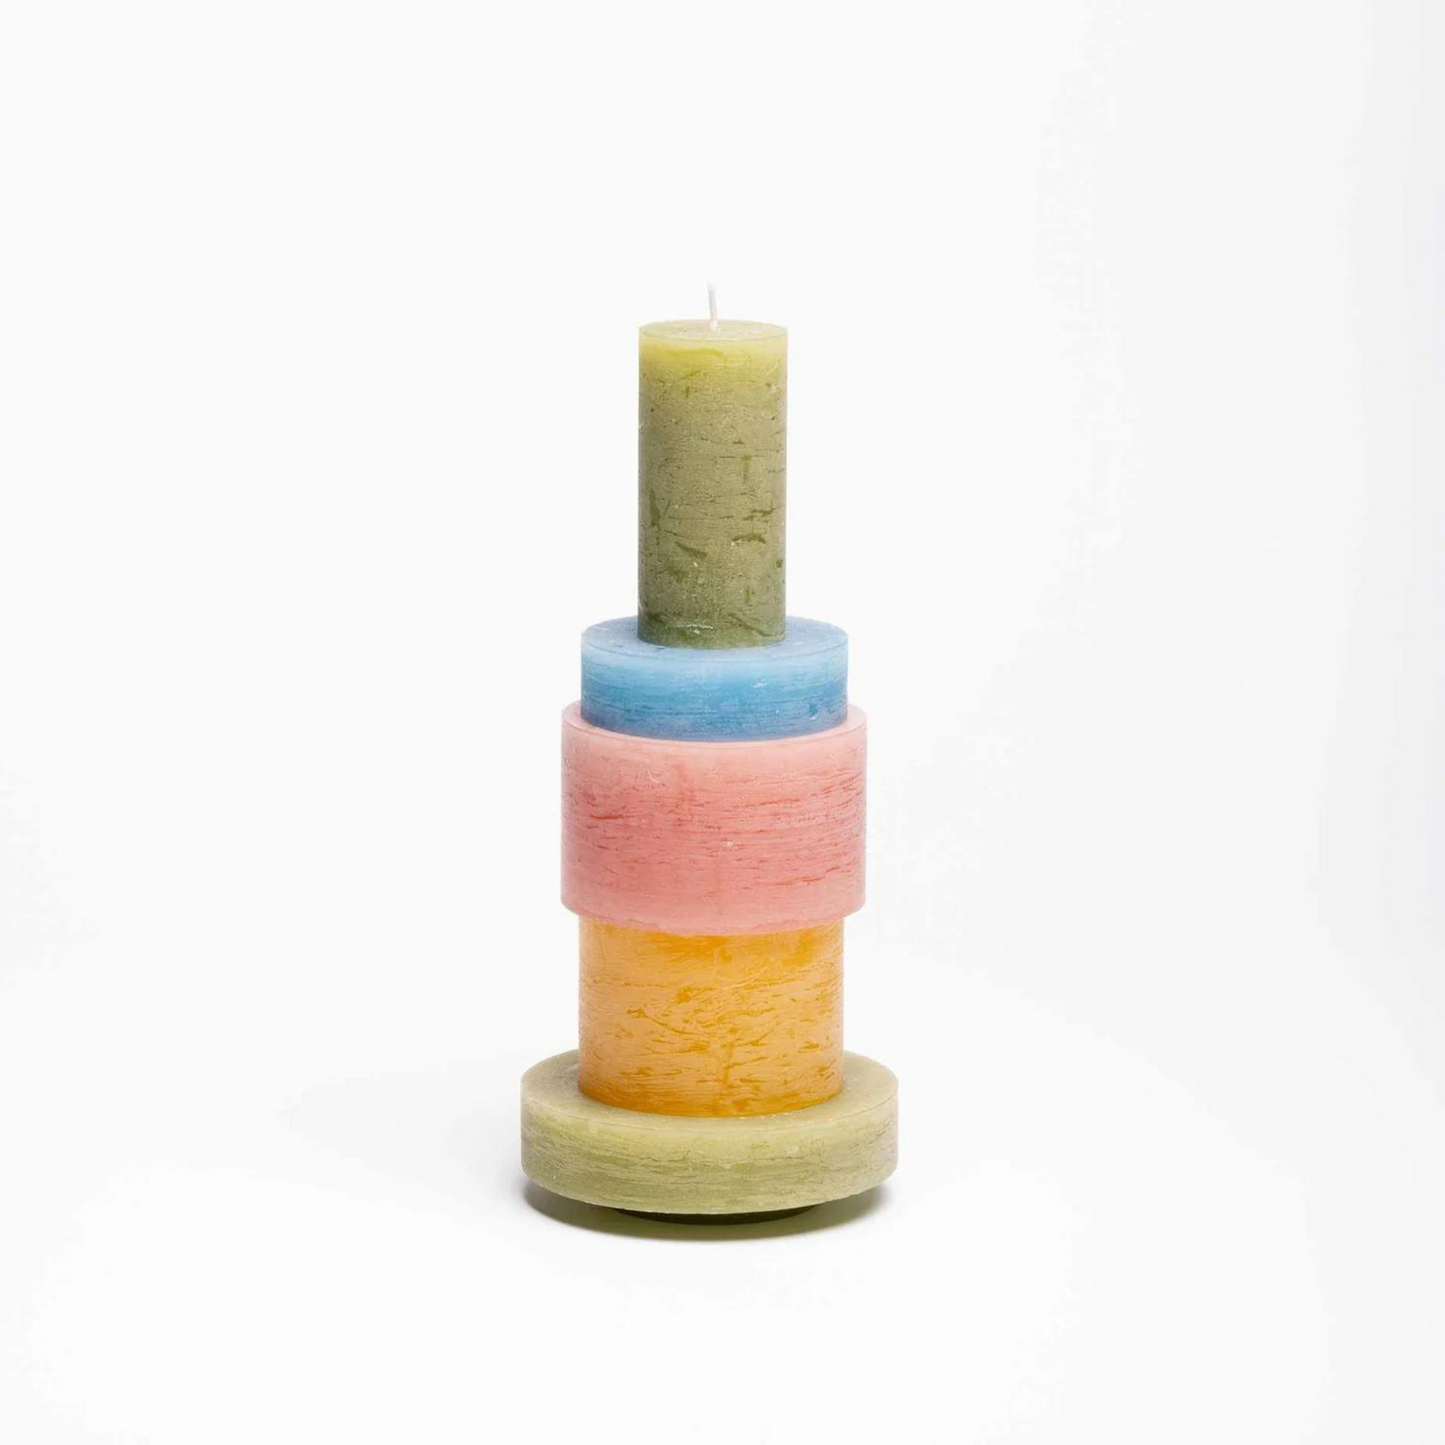  candle made up of 5 different colour components, stacked vertically.